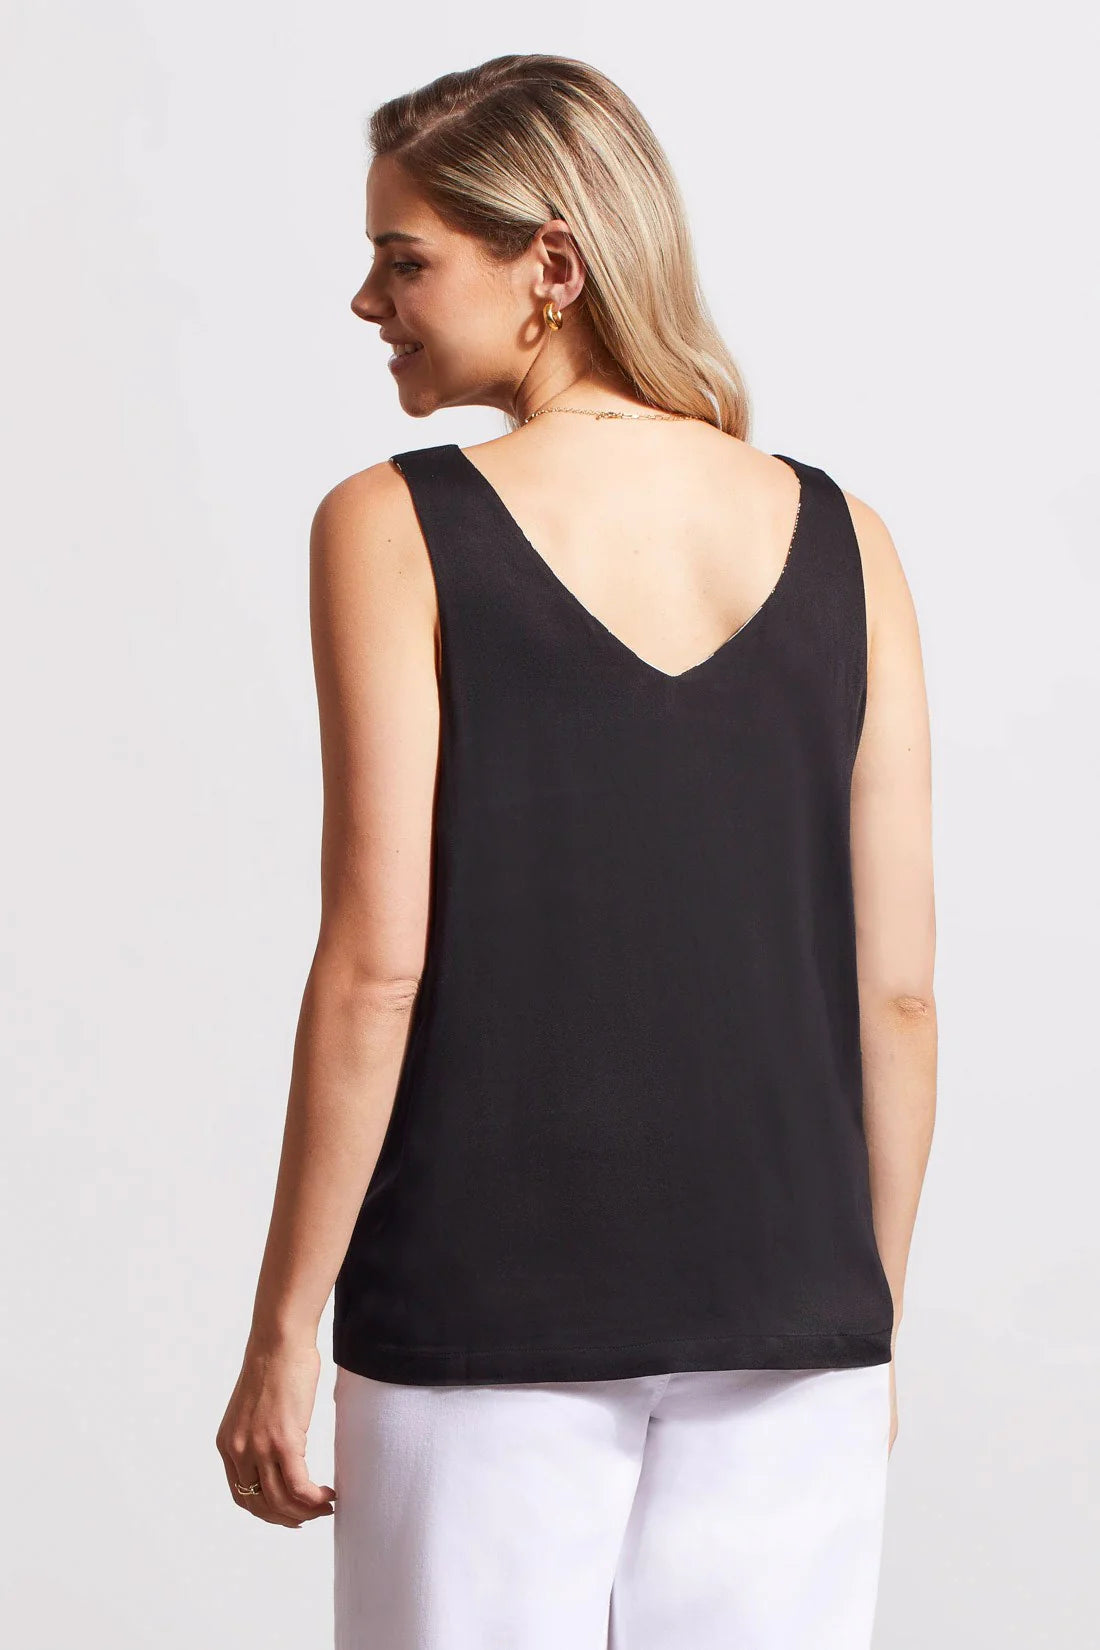 This V-neck cami is the style solution we've all been waiting for because it goes double duty as a reversible solid or print top, giving you endless options for getting dressed in the most fashionable way.